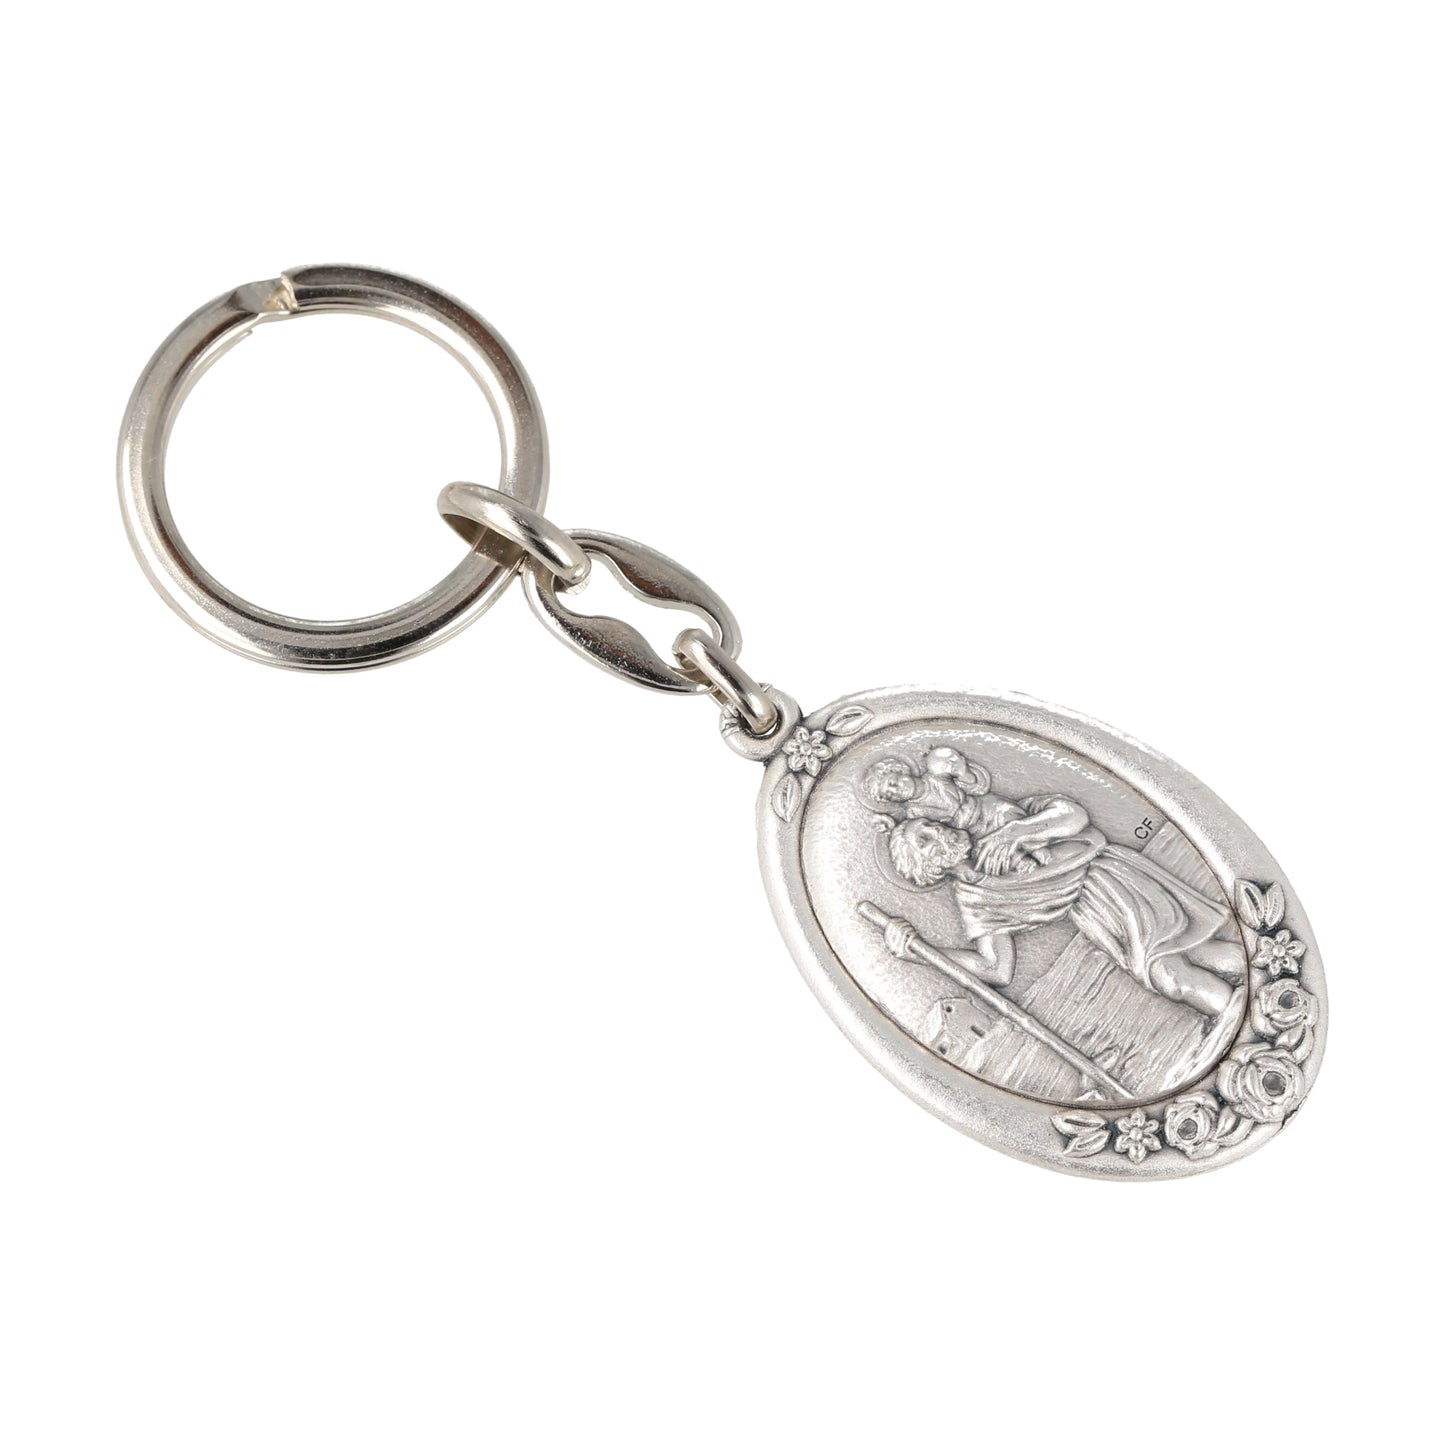 Keychain San Cristobal Oval Silvery With Flowers.  Souvenirs from Italy